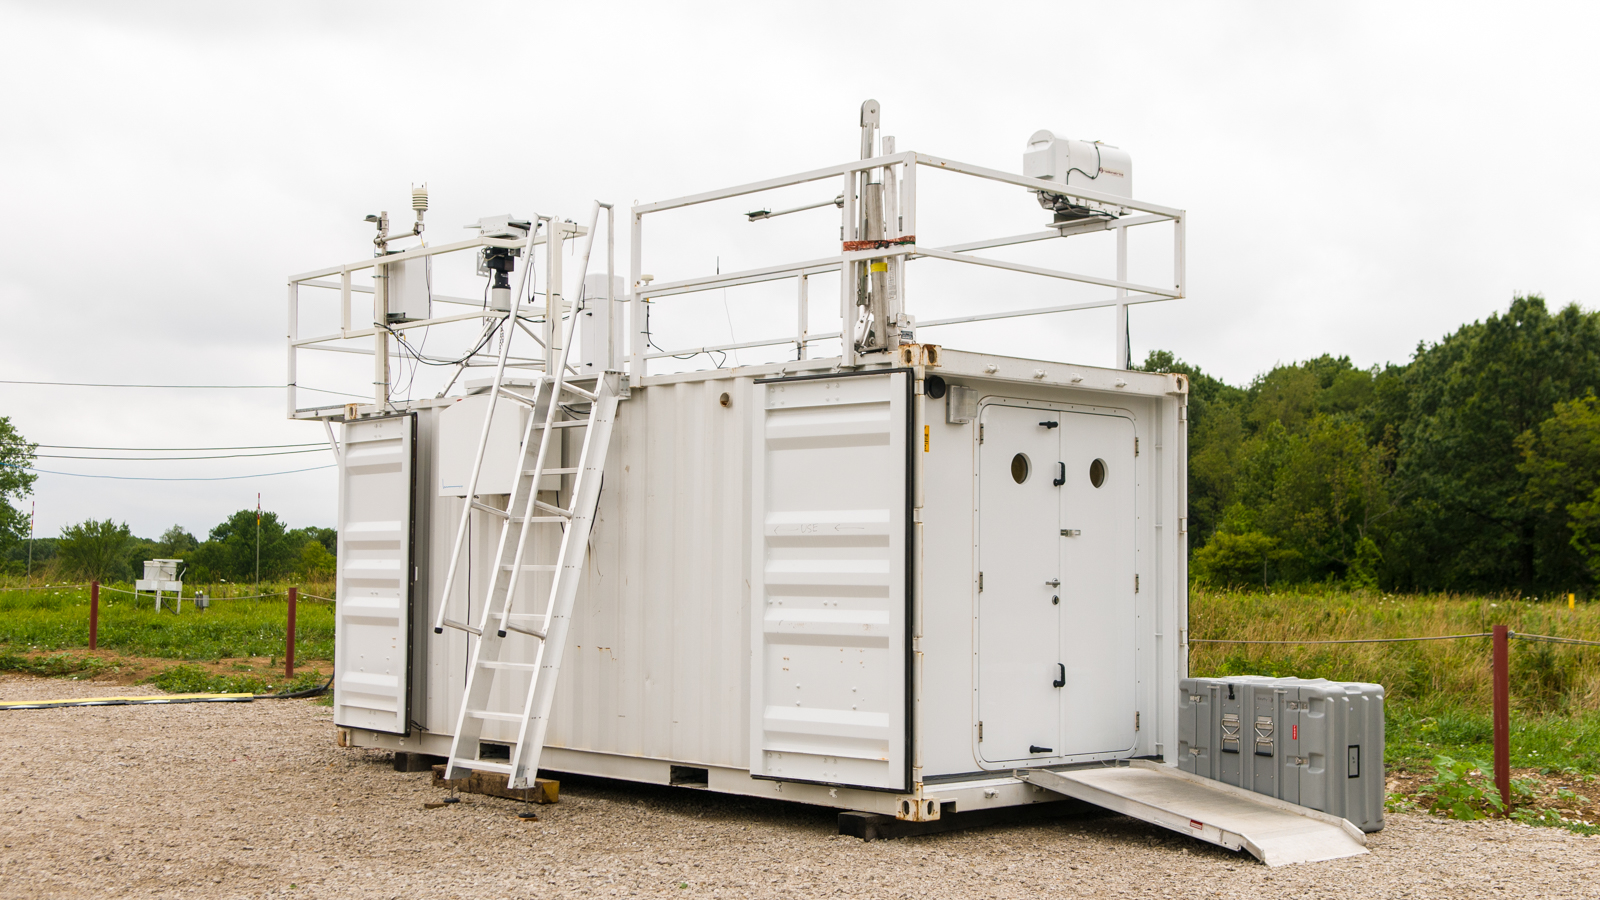 The container pictured here is called the "Operations Van". It will be deployed on the Bridge Deck of the Horizon Spirit, a cargo containment ship, for a year, while collecting climate data.